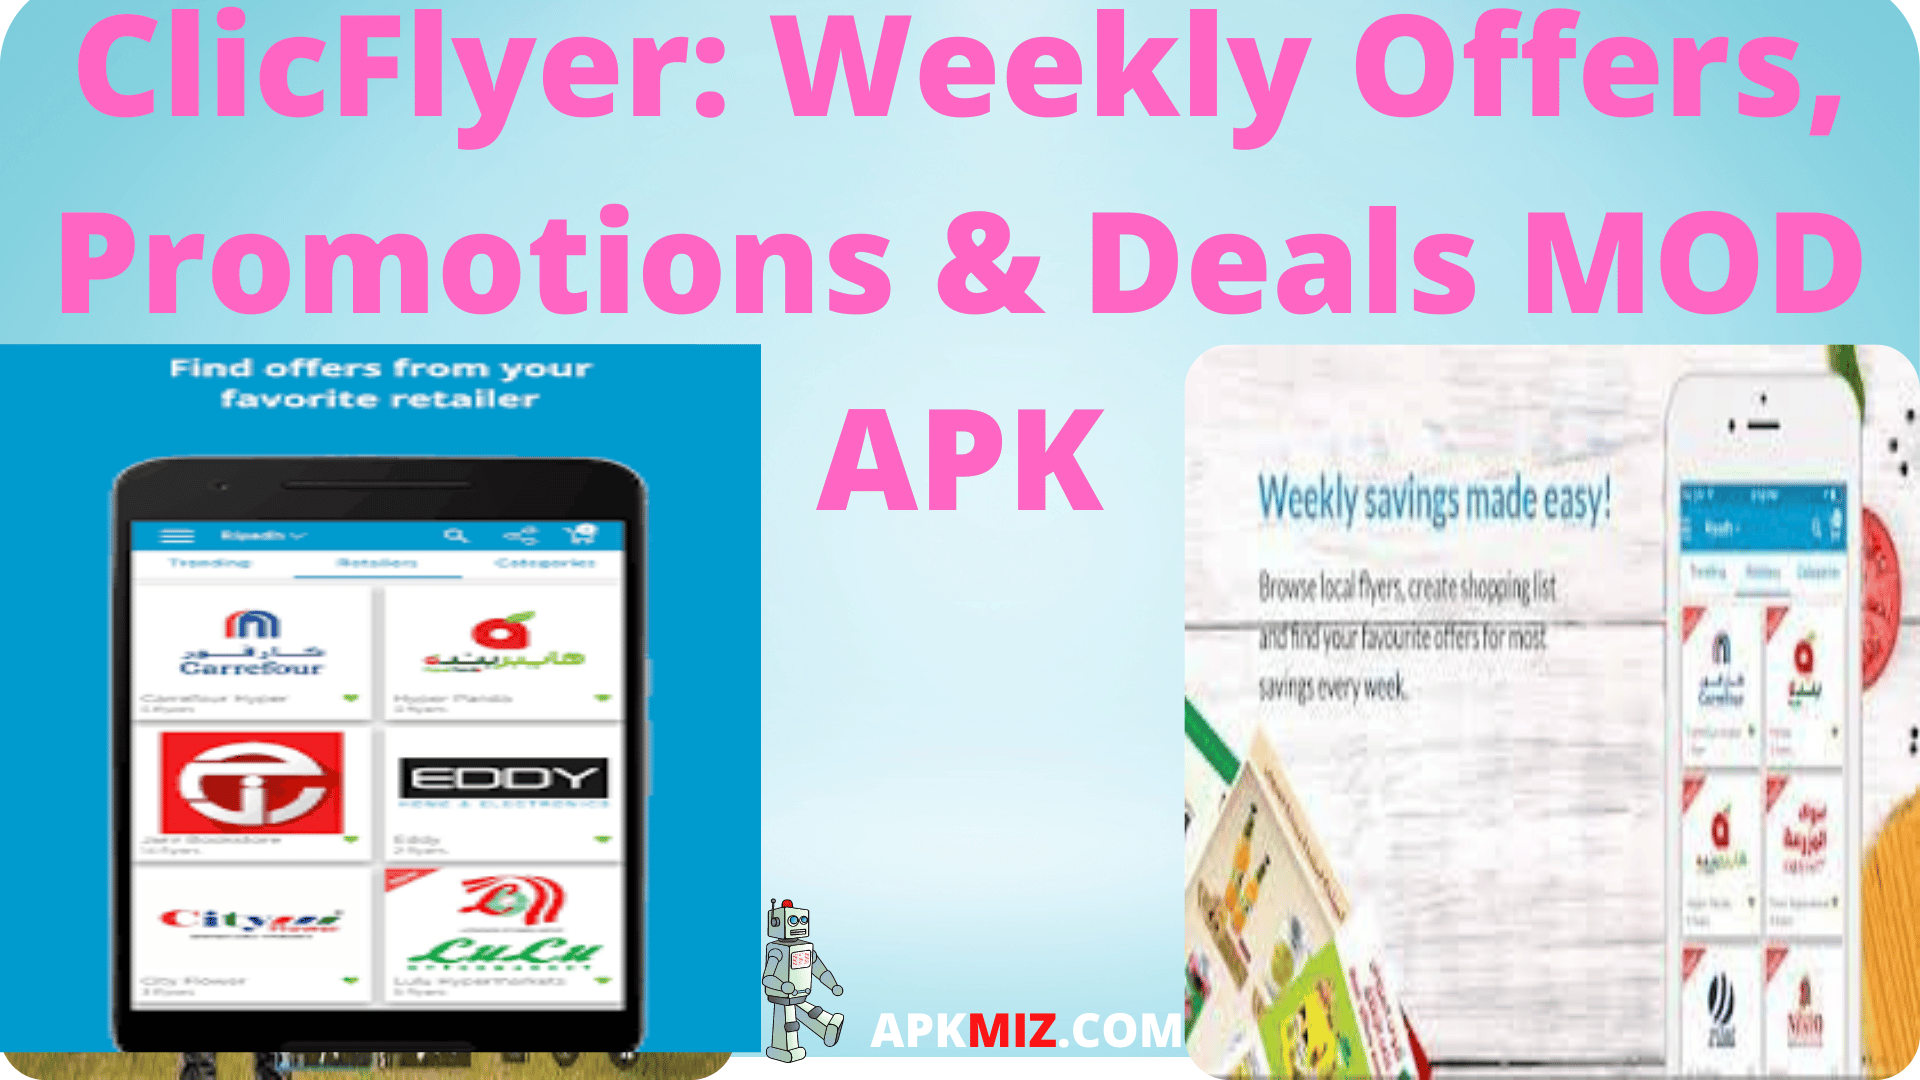 ClicFlyer: Weekly Offers, Promotions & Deals MOD APK